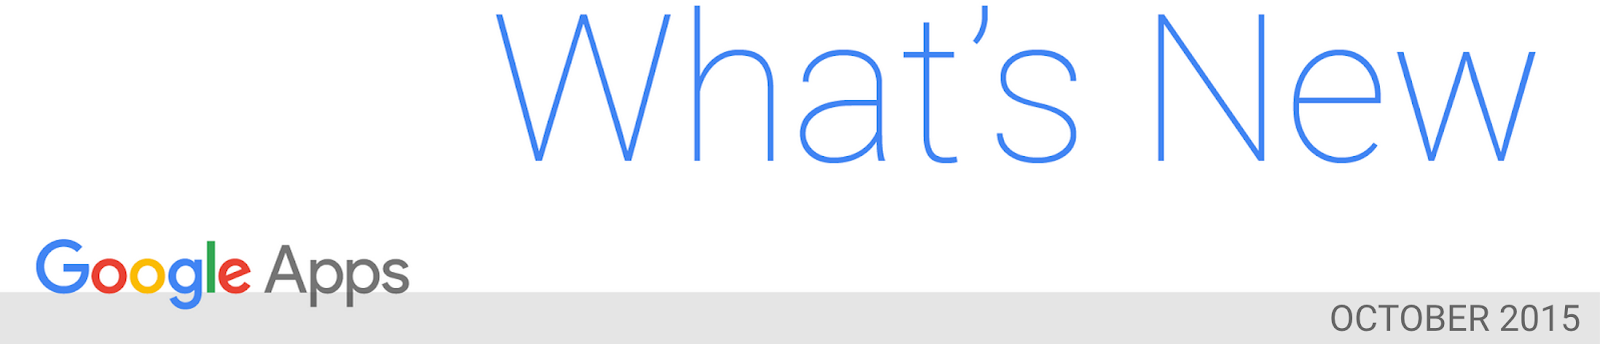 What's New in Apps newsletter header image